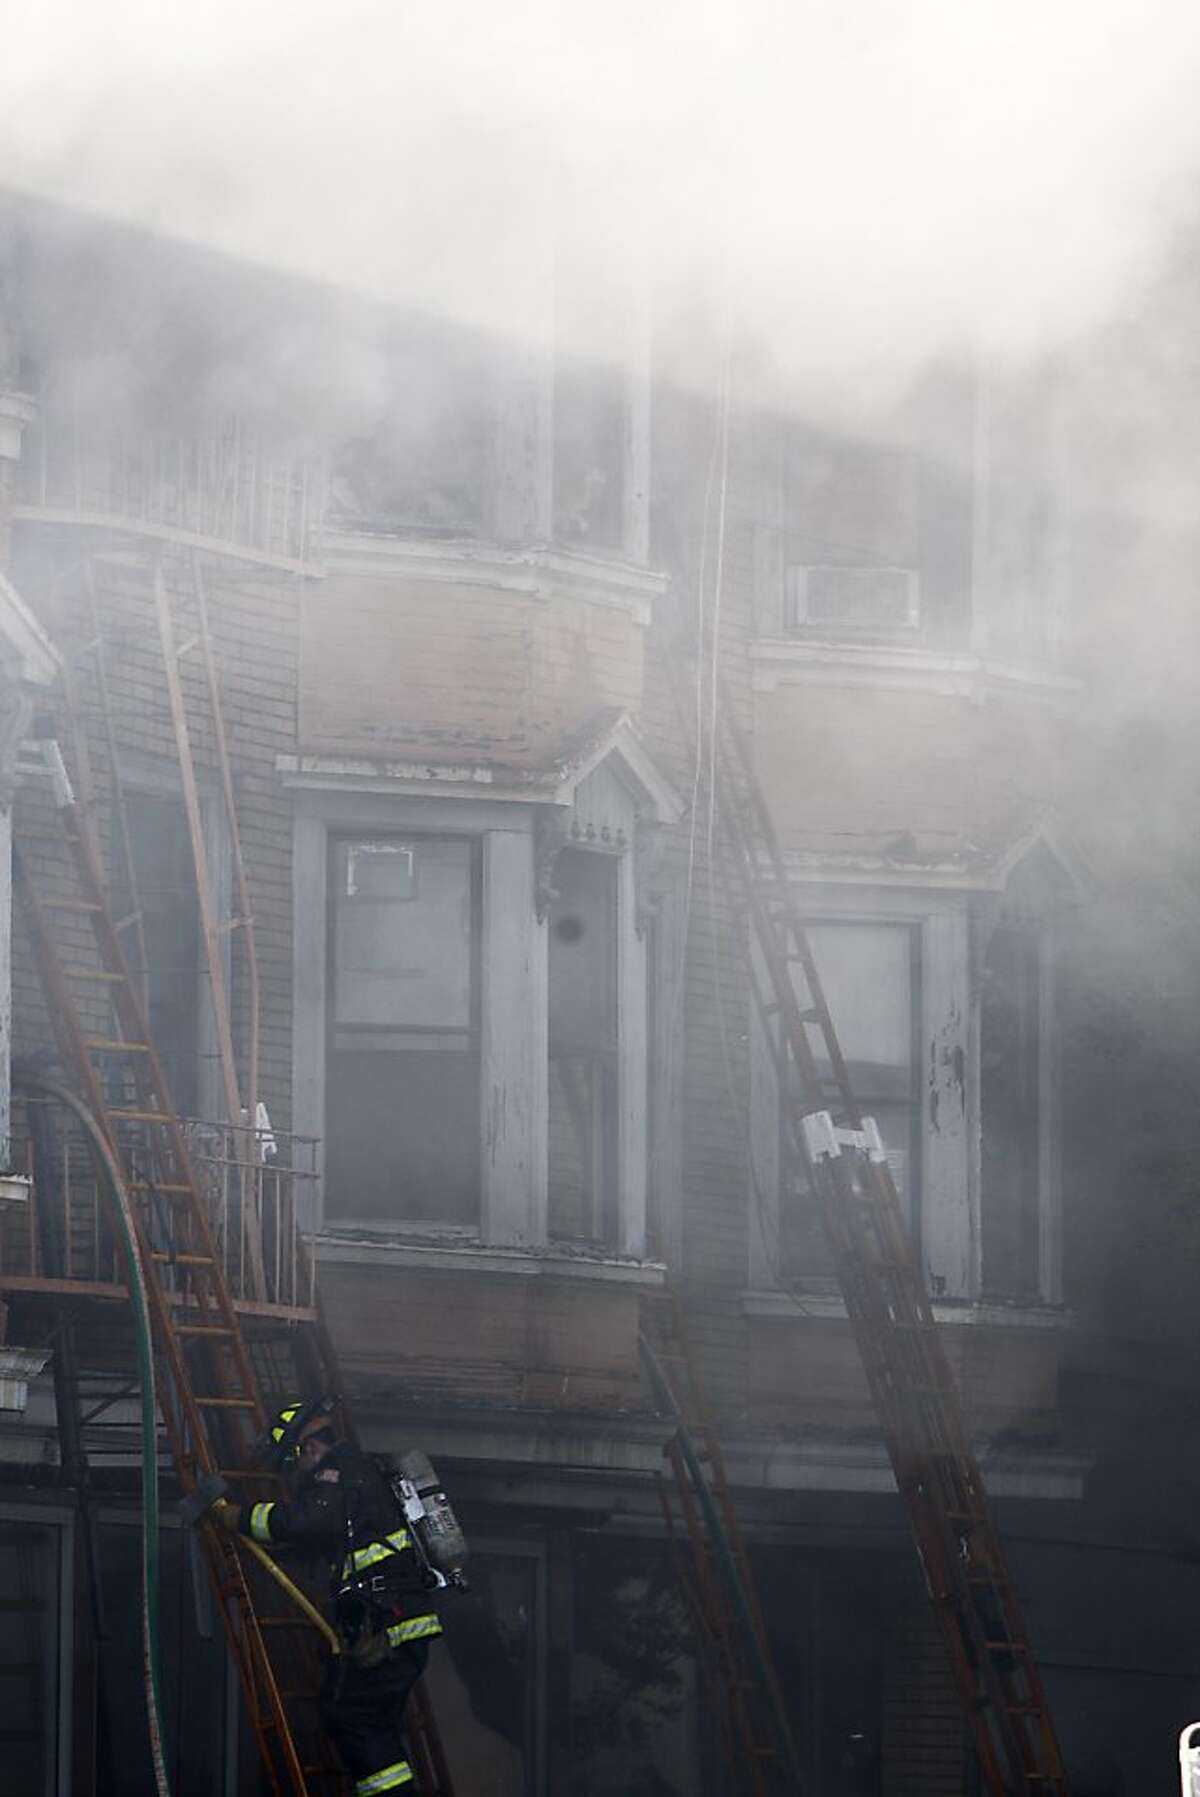 A four-alarm fire broke out at 1040 Folsom street in San Francisco on Wednesday, May 4, 2011.